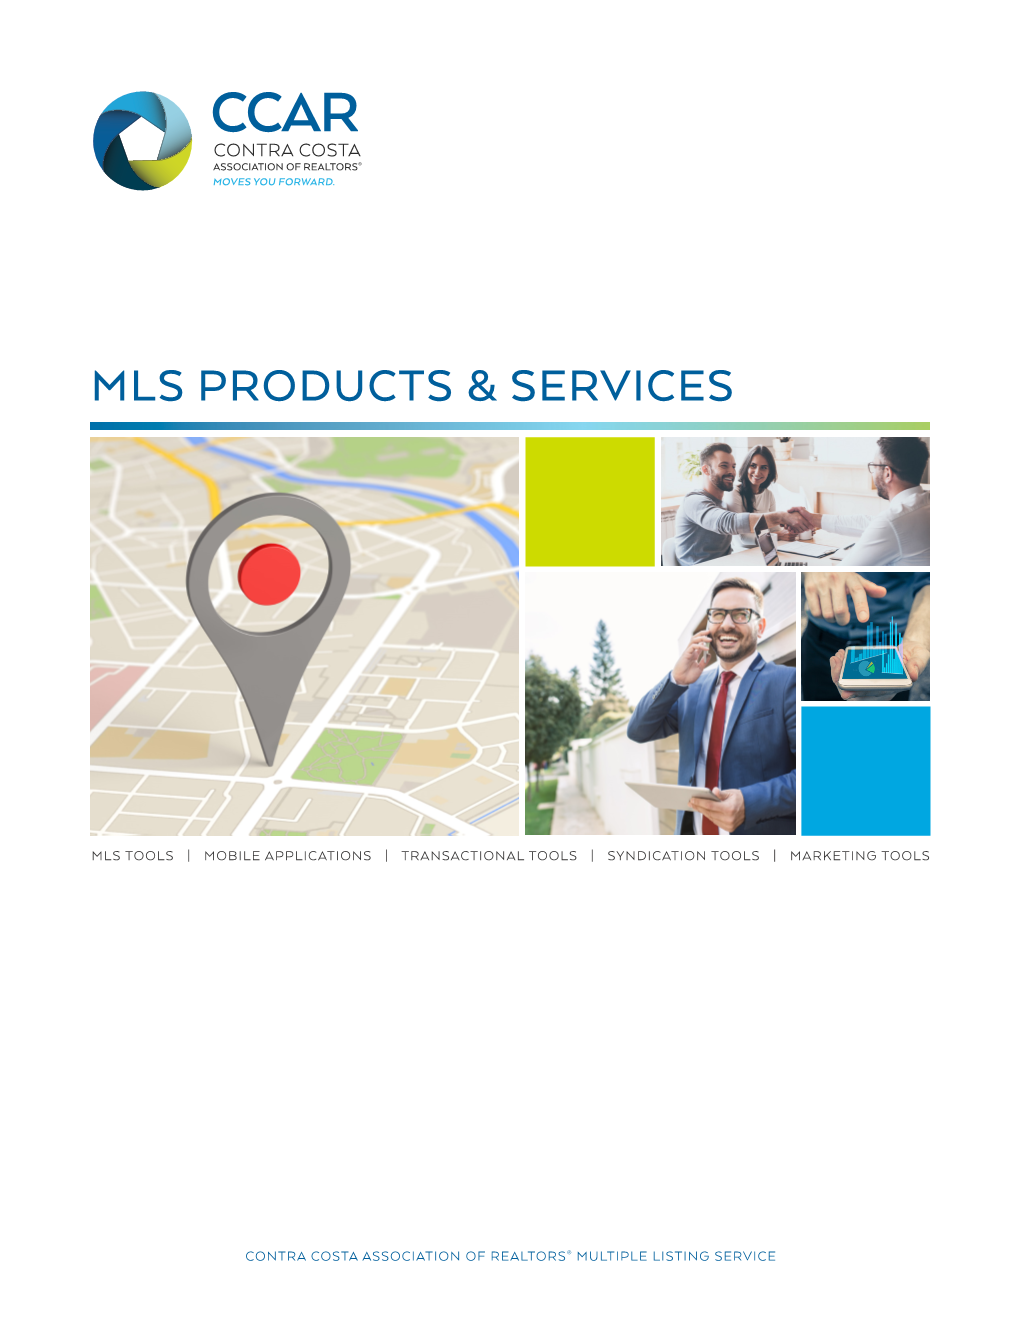 Mls Products & Services